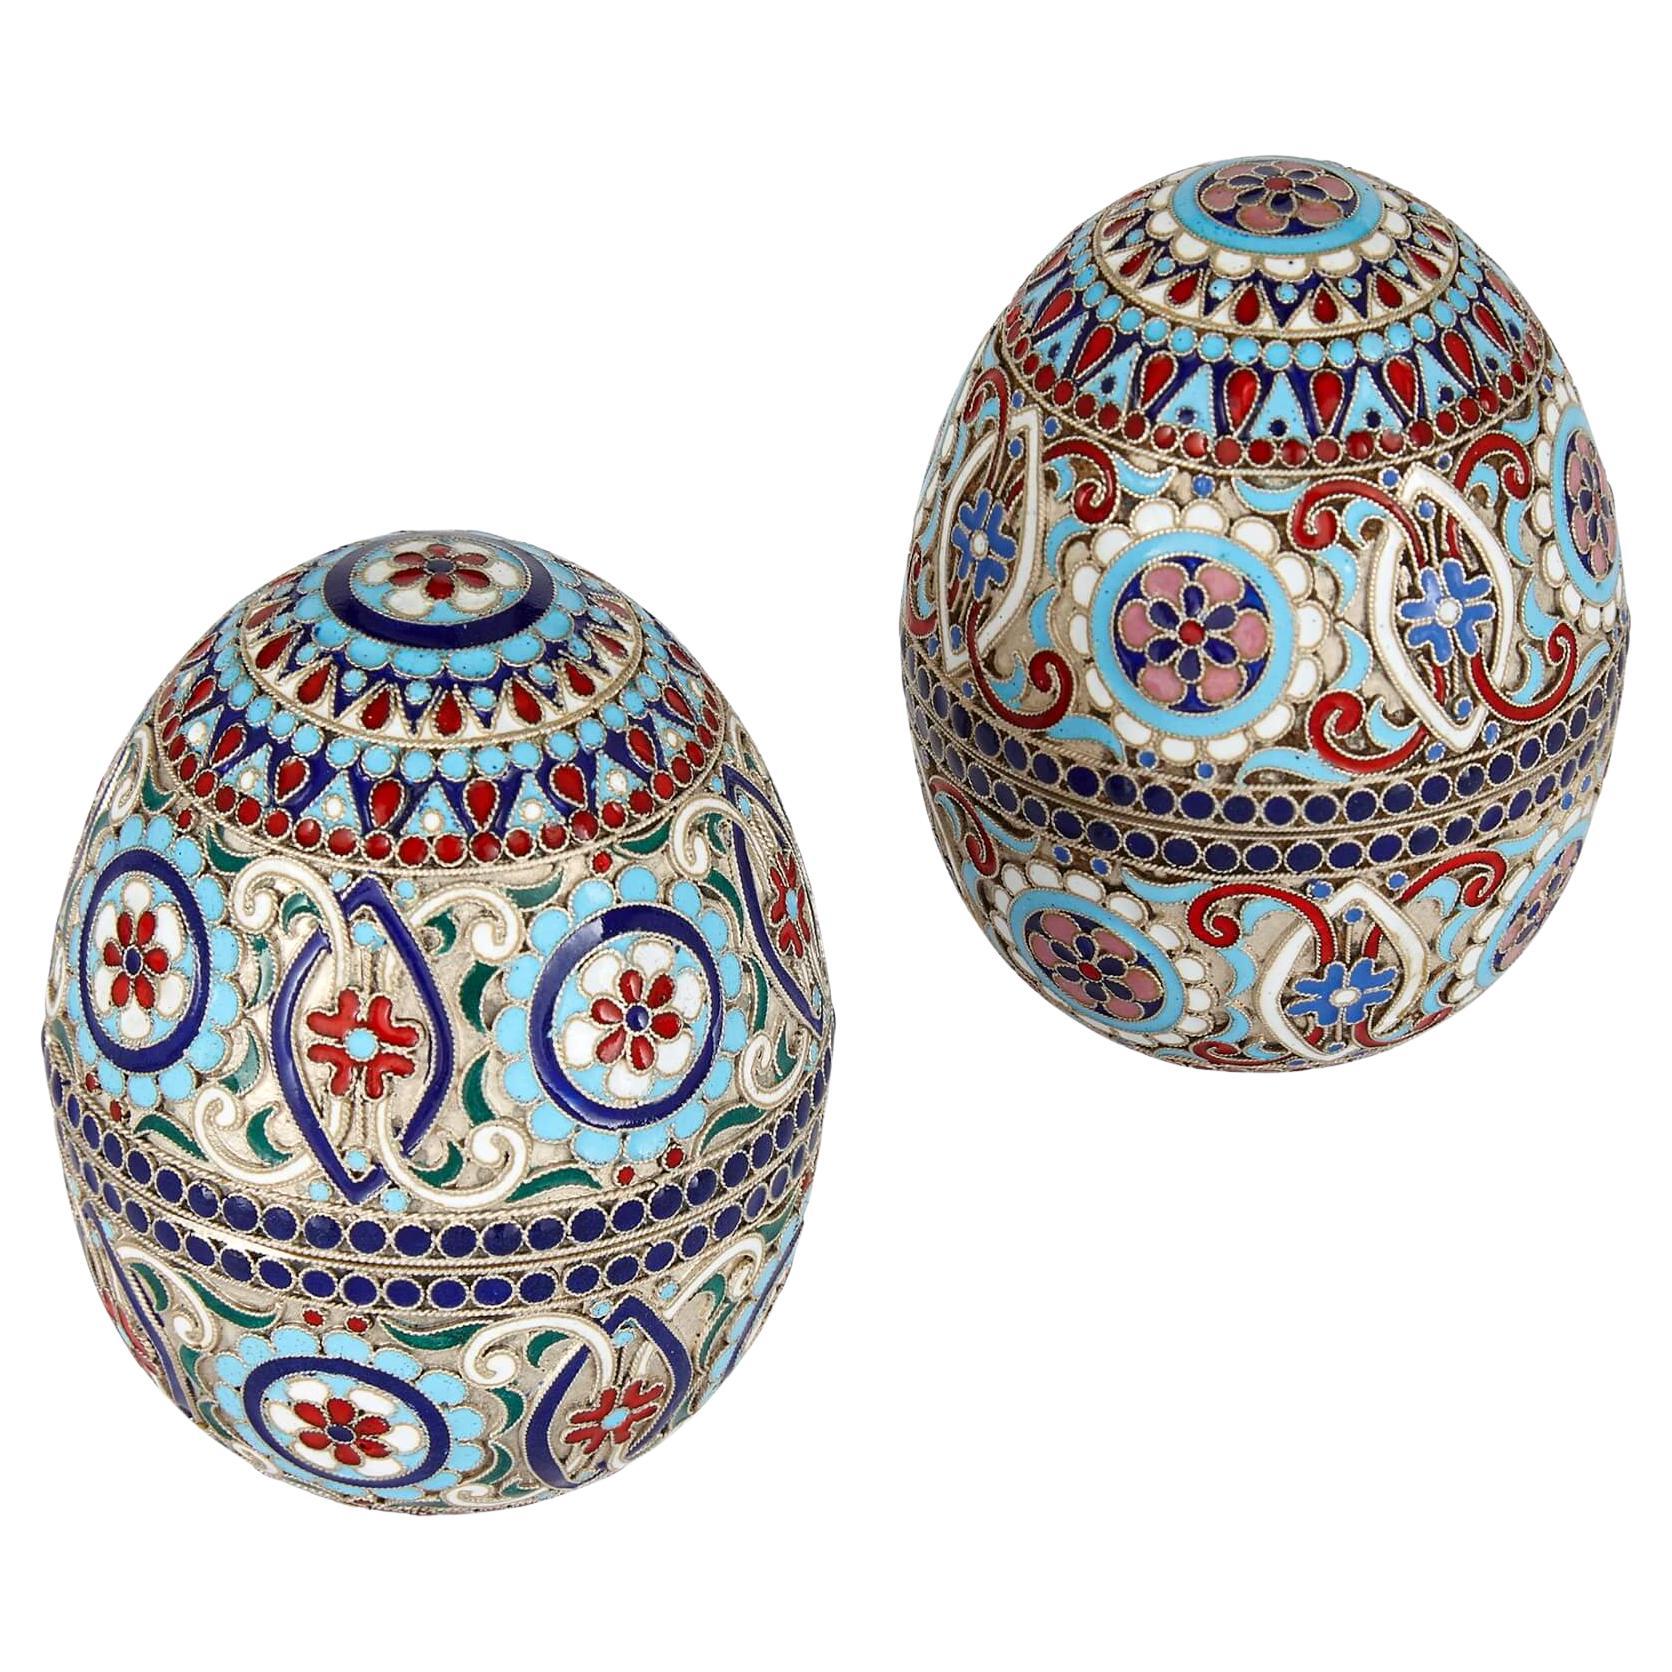 Pair of Cloisonné Enamel Decorated and Silver Gilt Eggs 